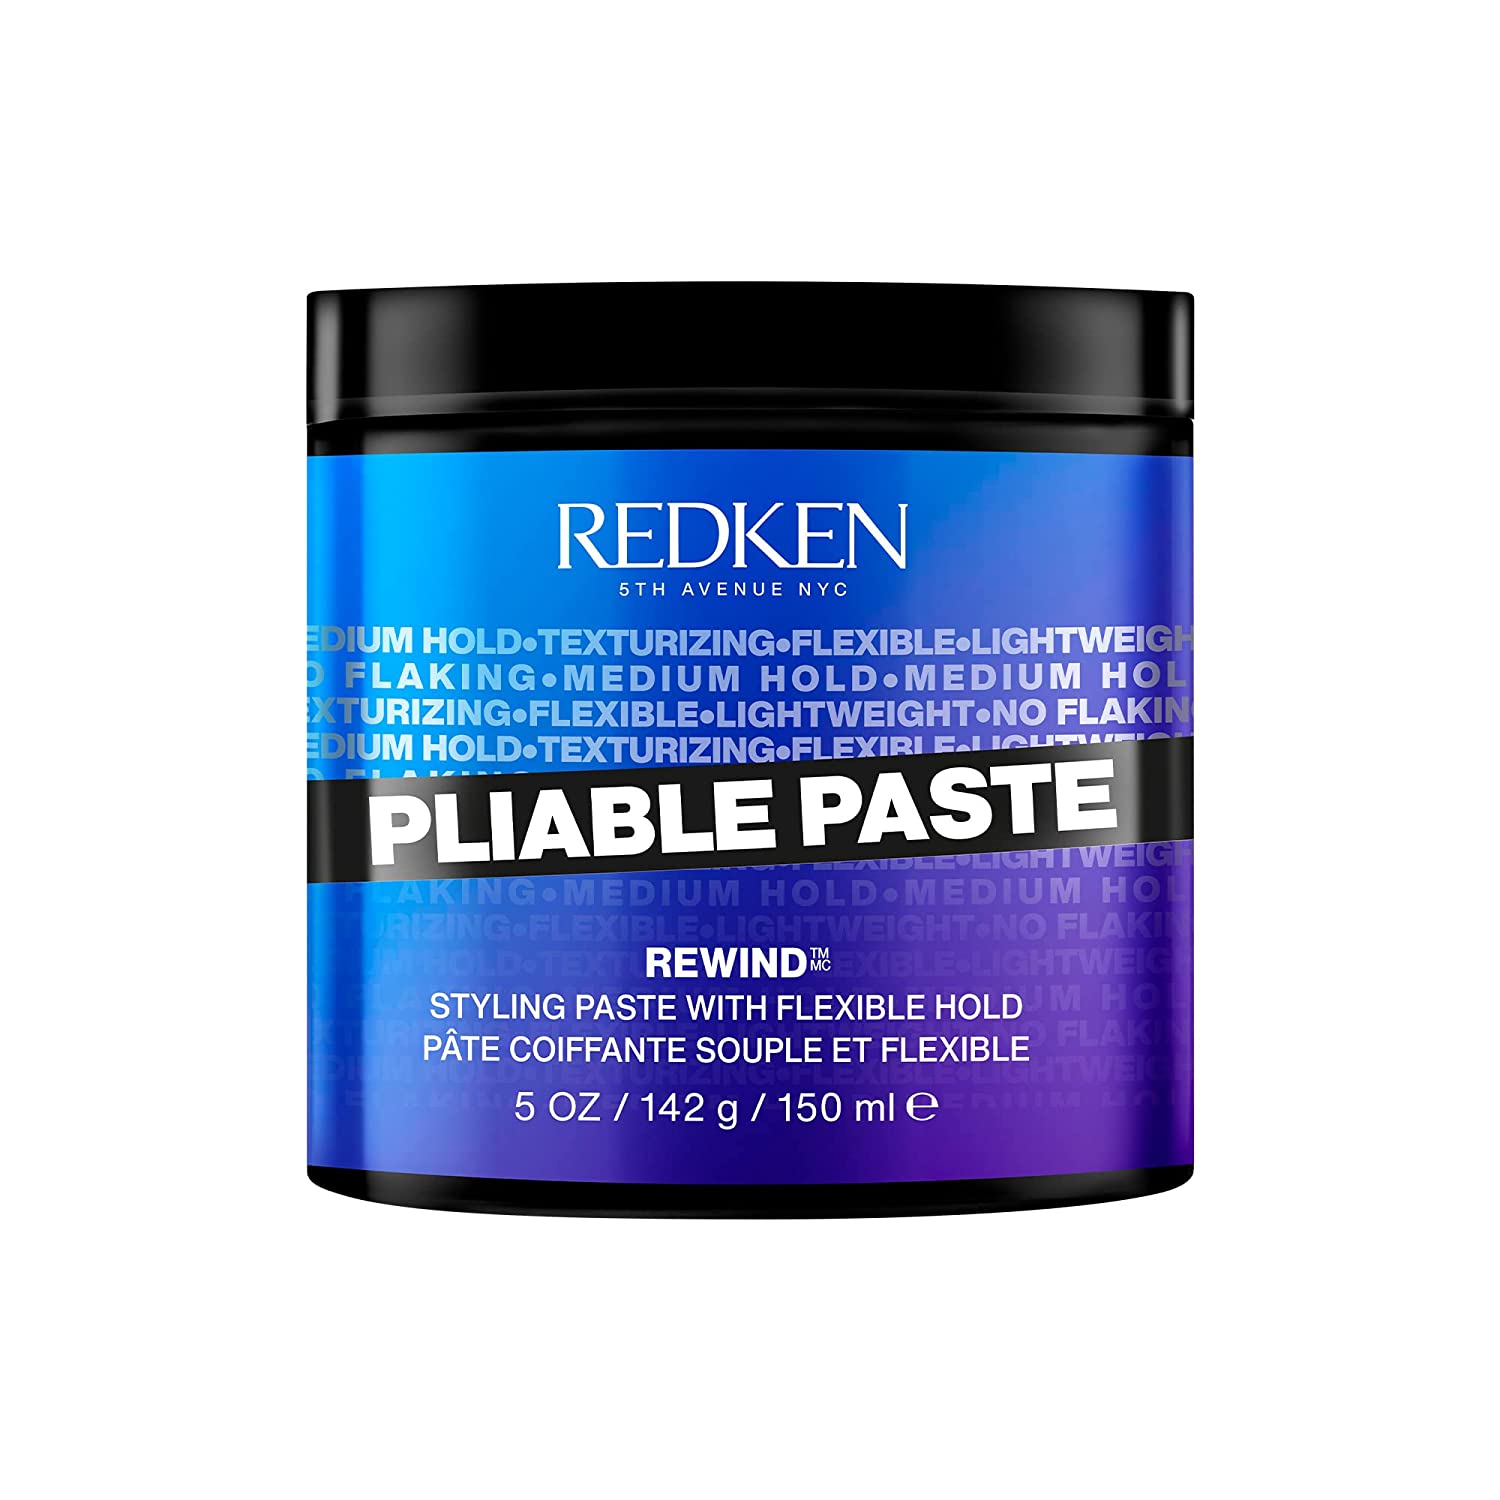 Redken Pliable Paste Flexible Hold Styling Paste | For All Hair Types | Adds Lightweight, Flexible Texture & Moisture | Medium Hold | 5 Oz - image 1 of 2